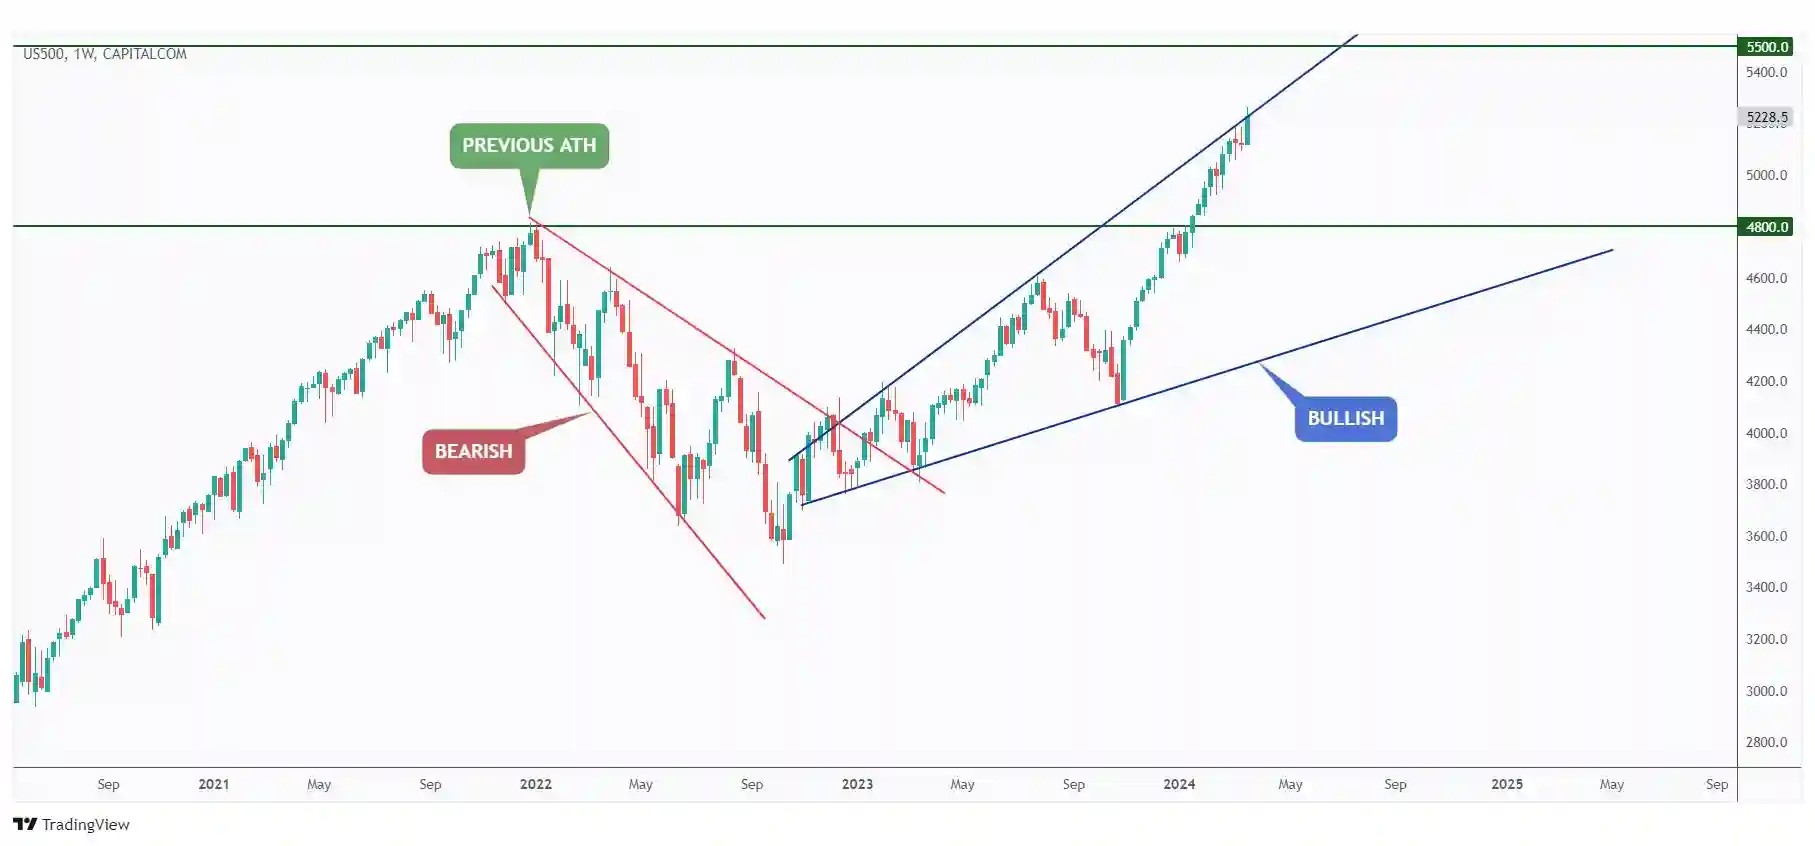 US500 weekly chart showing that it is overbought hovering around the upper bound of the wedge pattern.